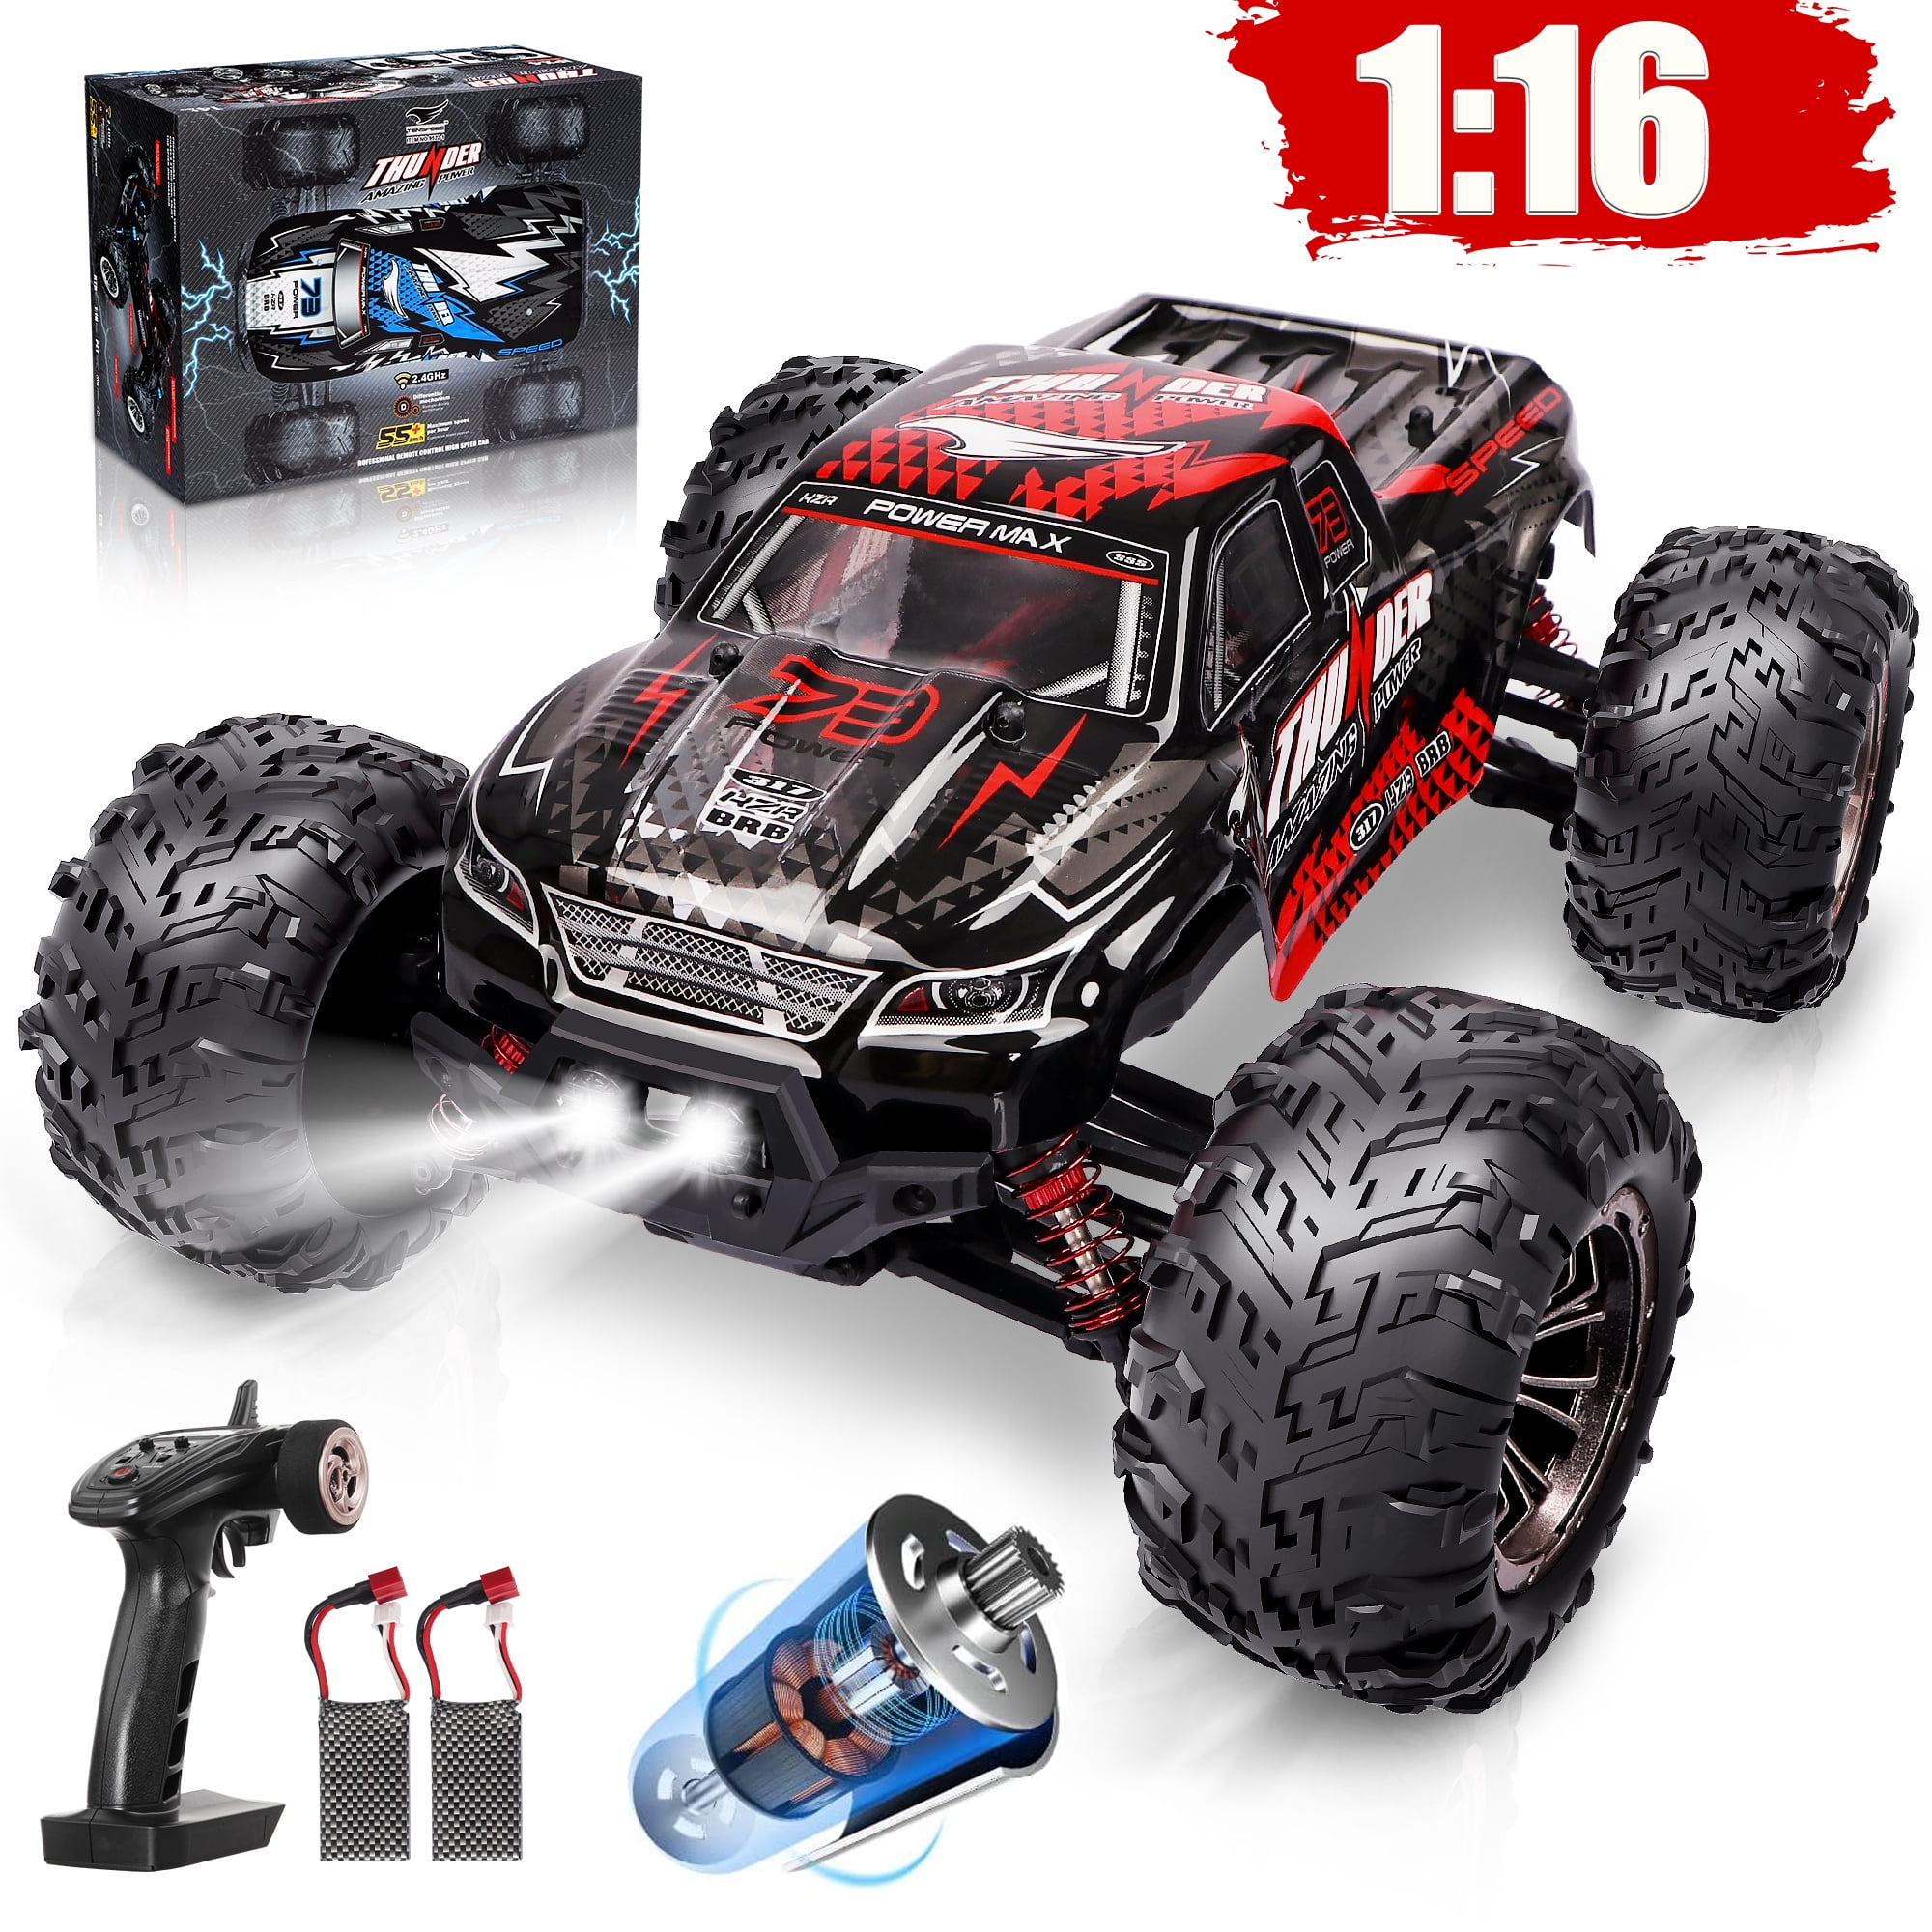 Remote Control Car High Speed RC Car Off Road Vehicle 1:16 Scale 23MPH 4WD 2.4GHz Racing Car RC Buggy Truck Crawler Toys for 8~16 Years Boys Girls Adults by HISTORM 